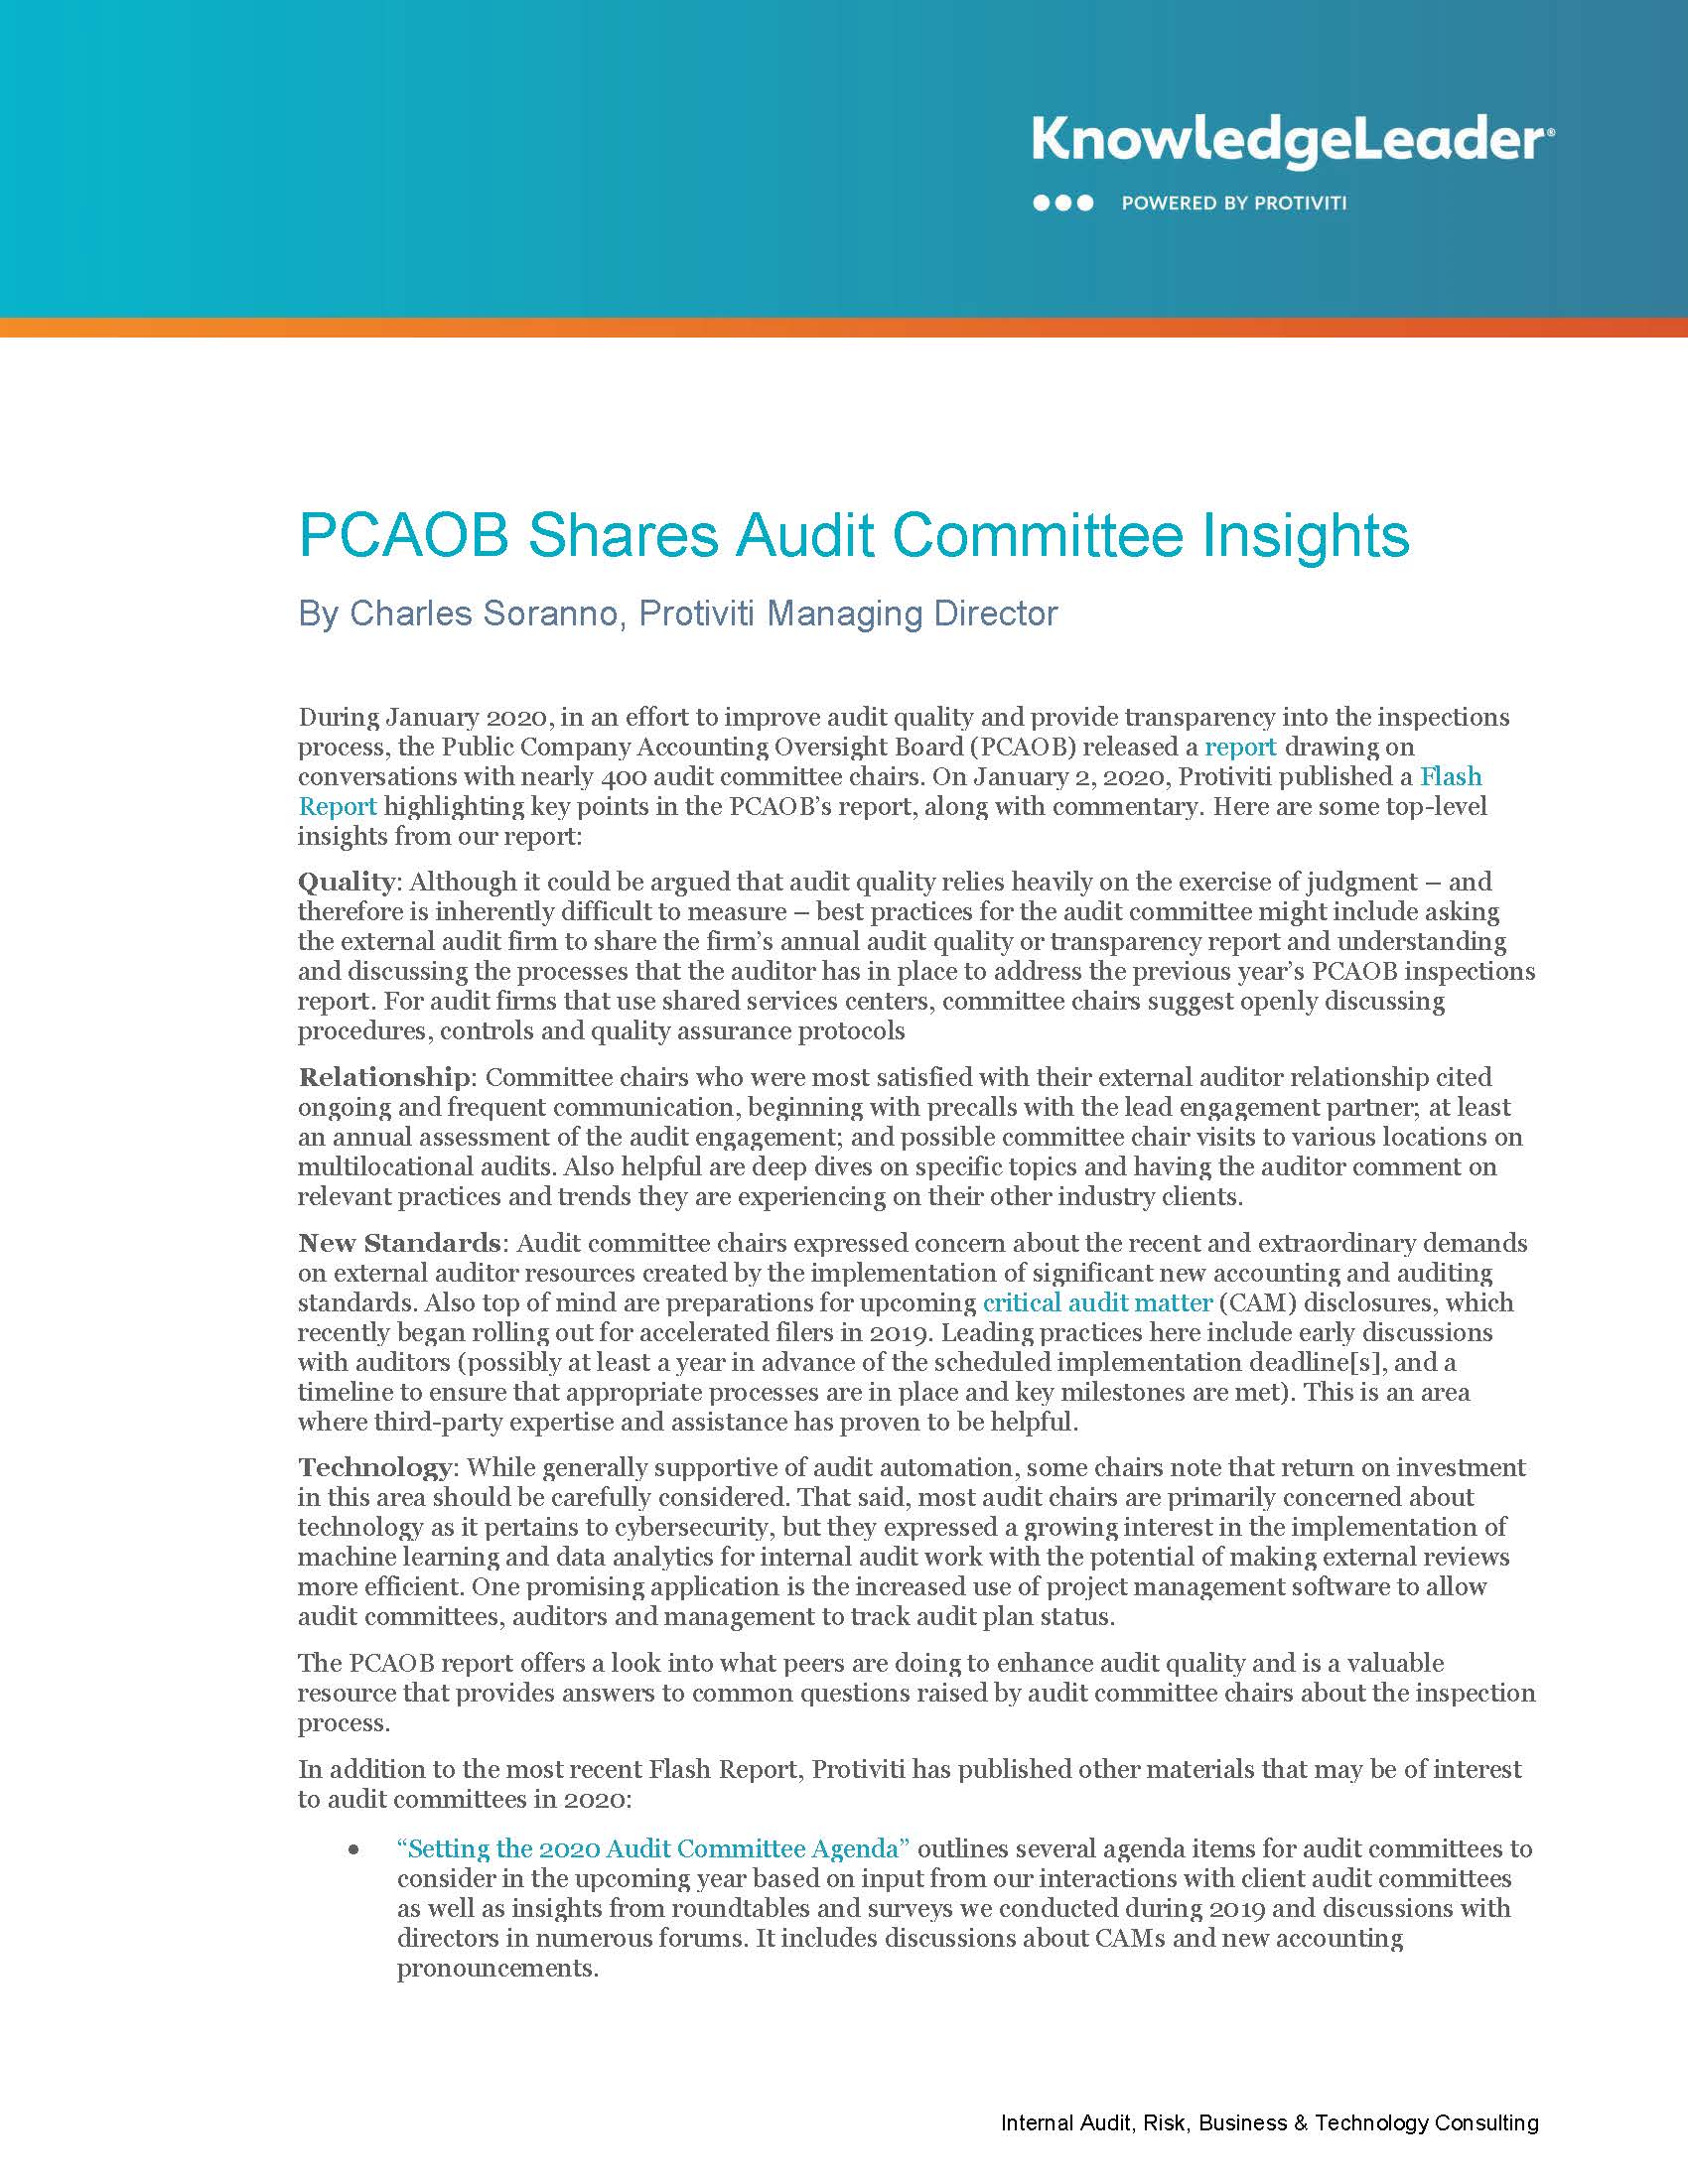 Screenshot of the first page of PCAOB Shares Audit Committee Insights